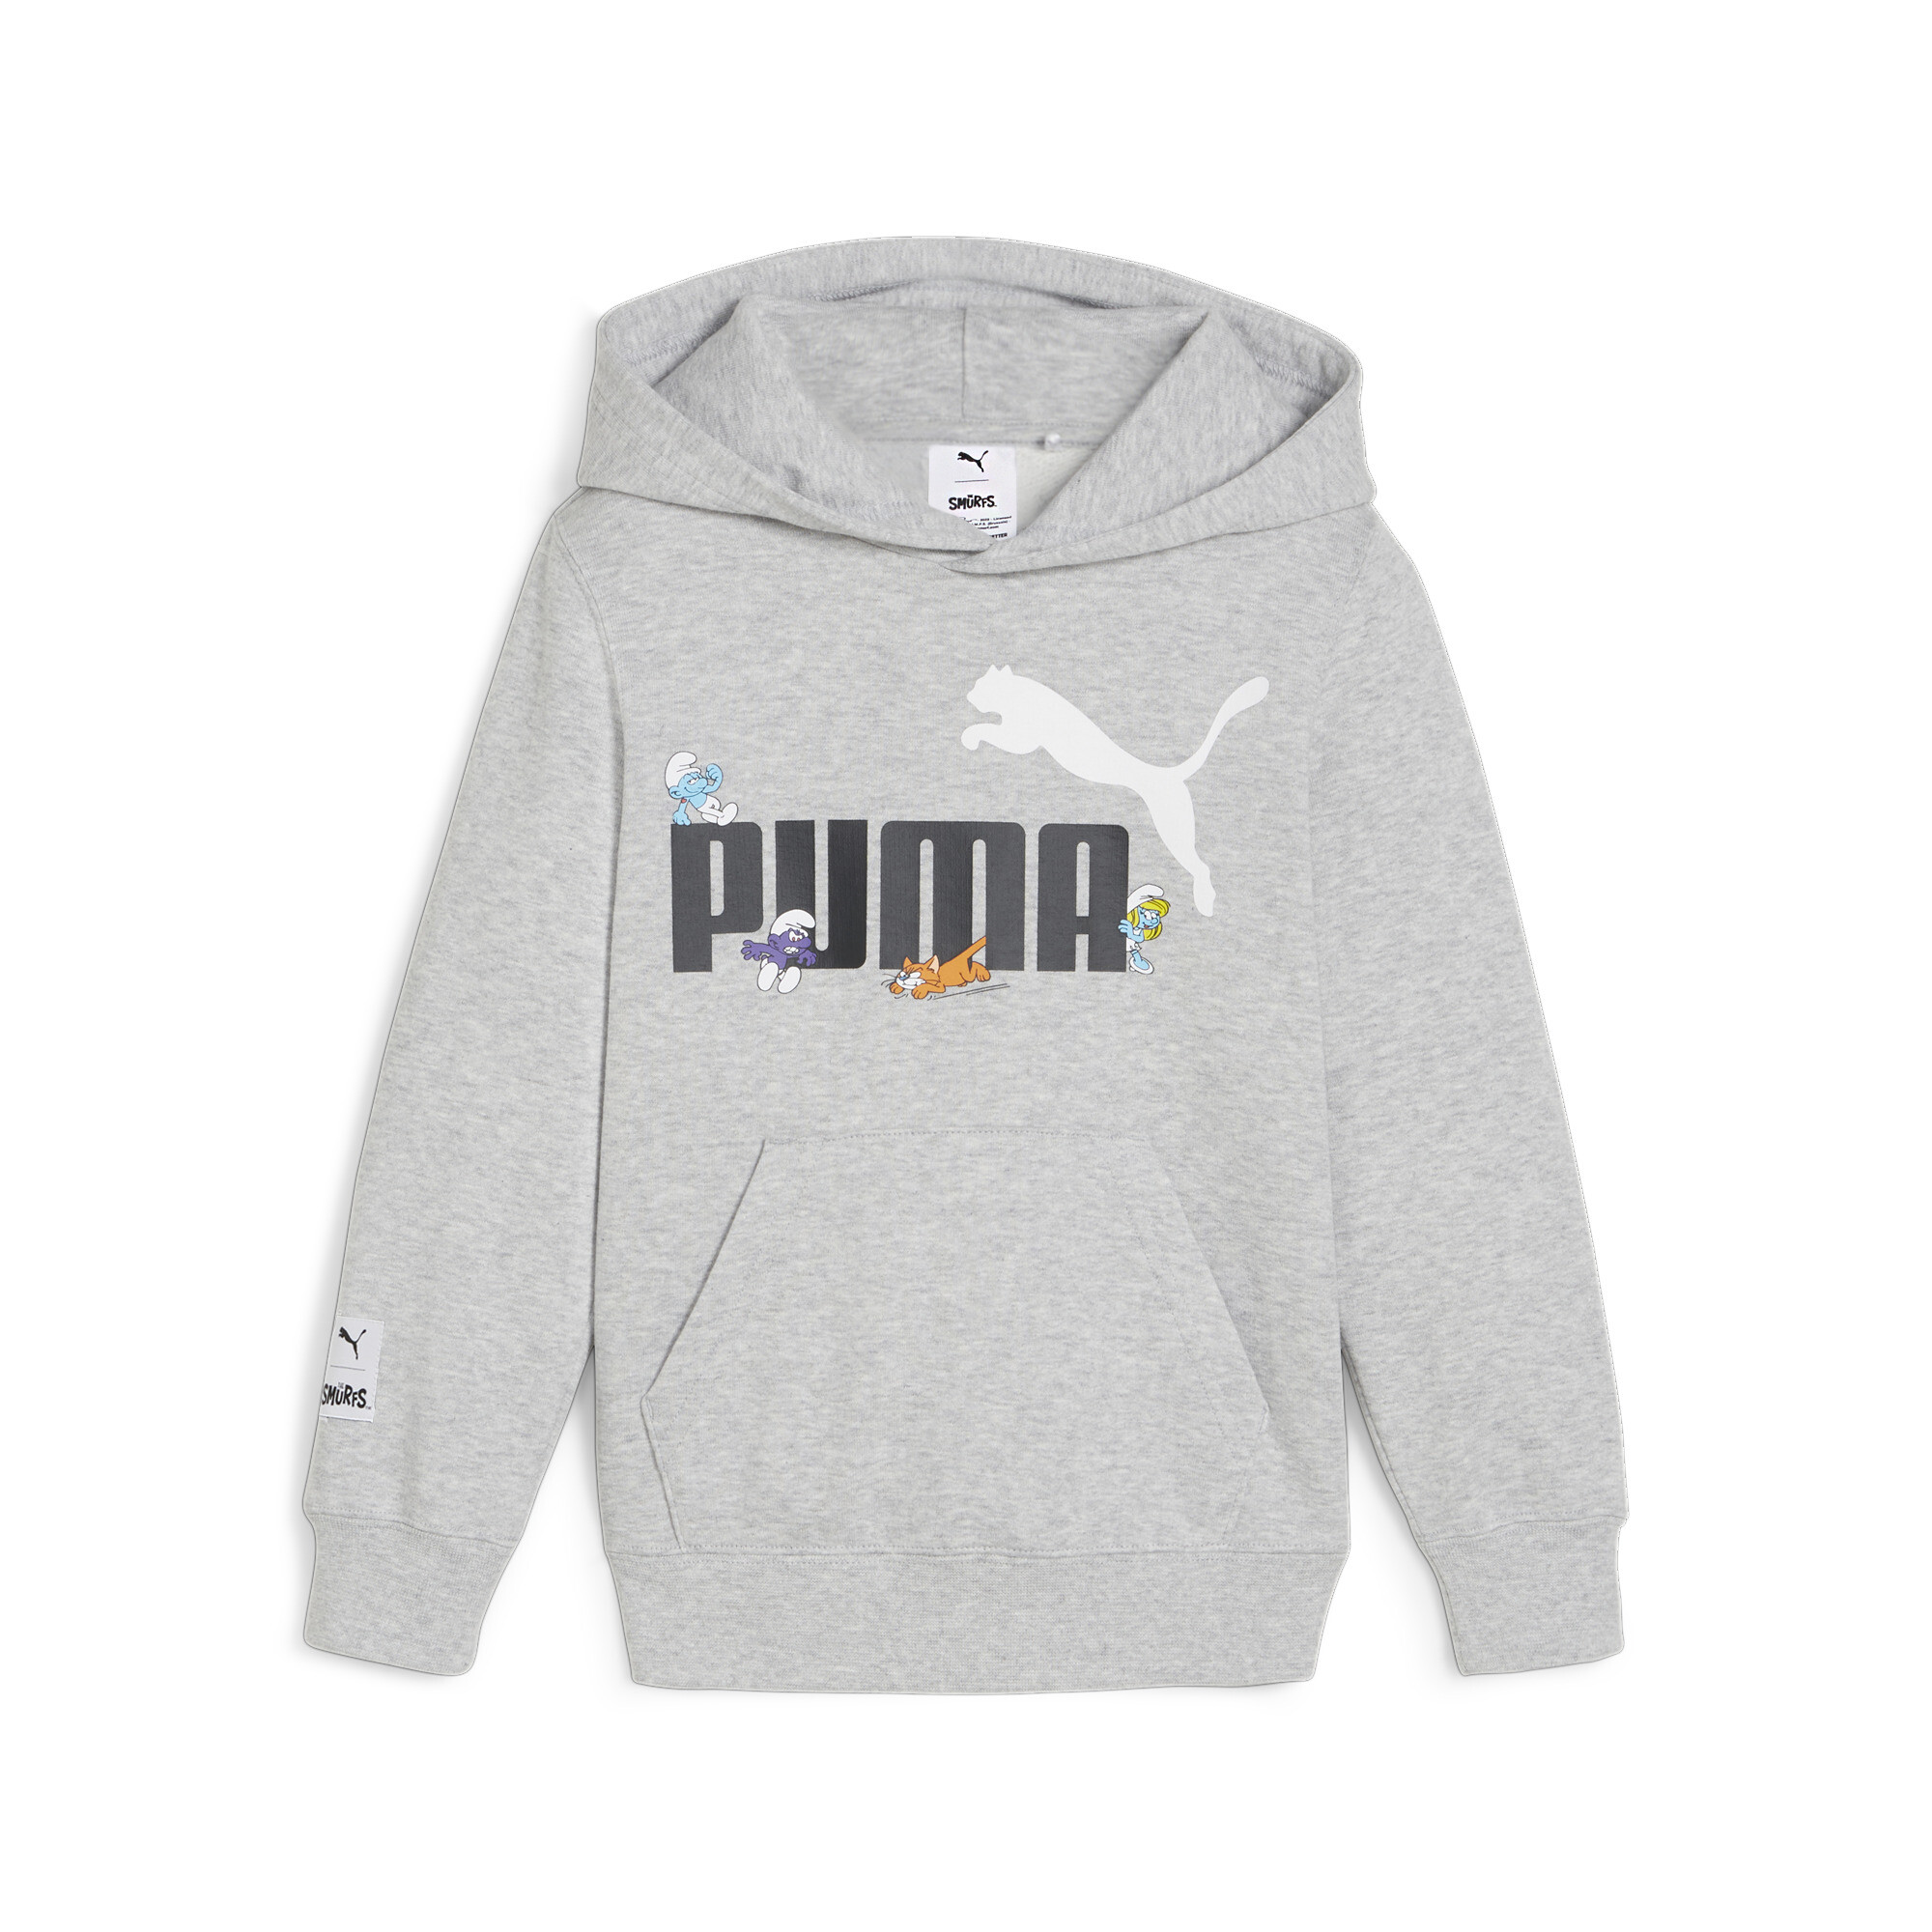 PUMA X THE SMURFS Hoodie In Heather, Size 4-5 Youth